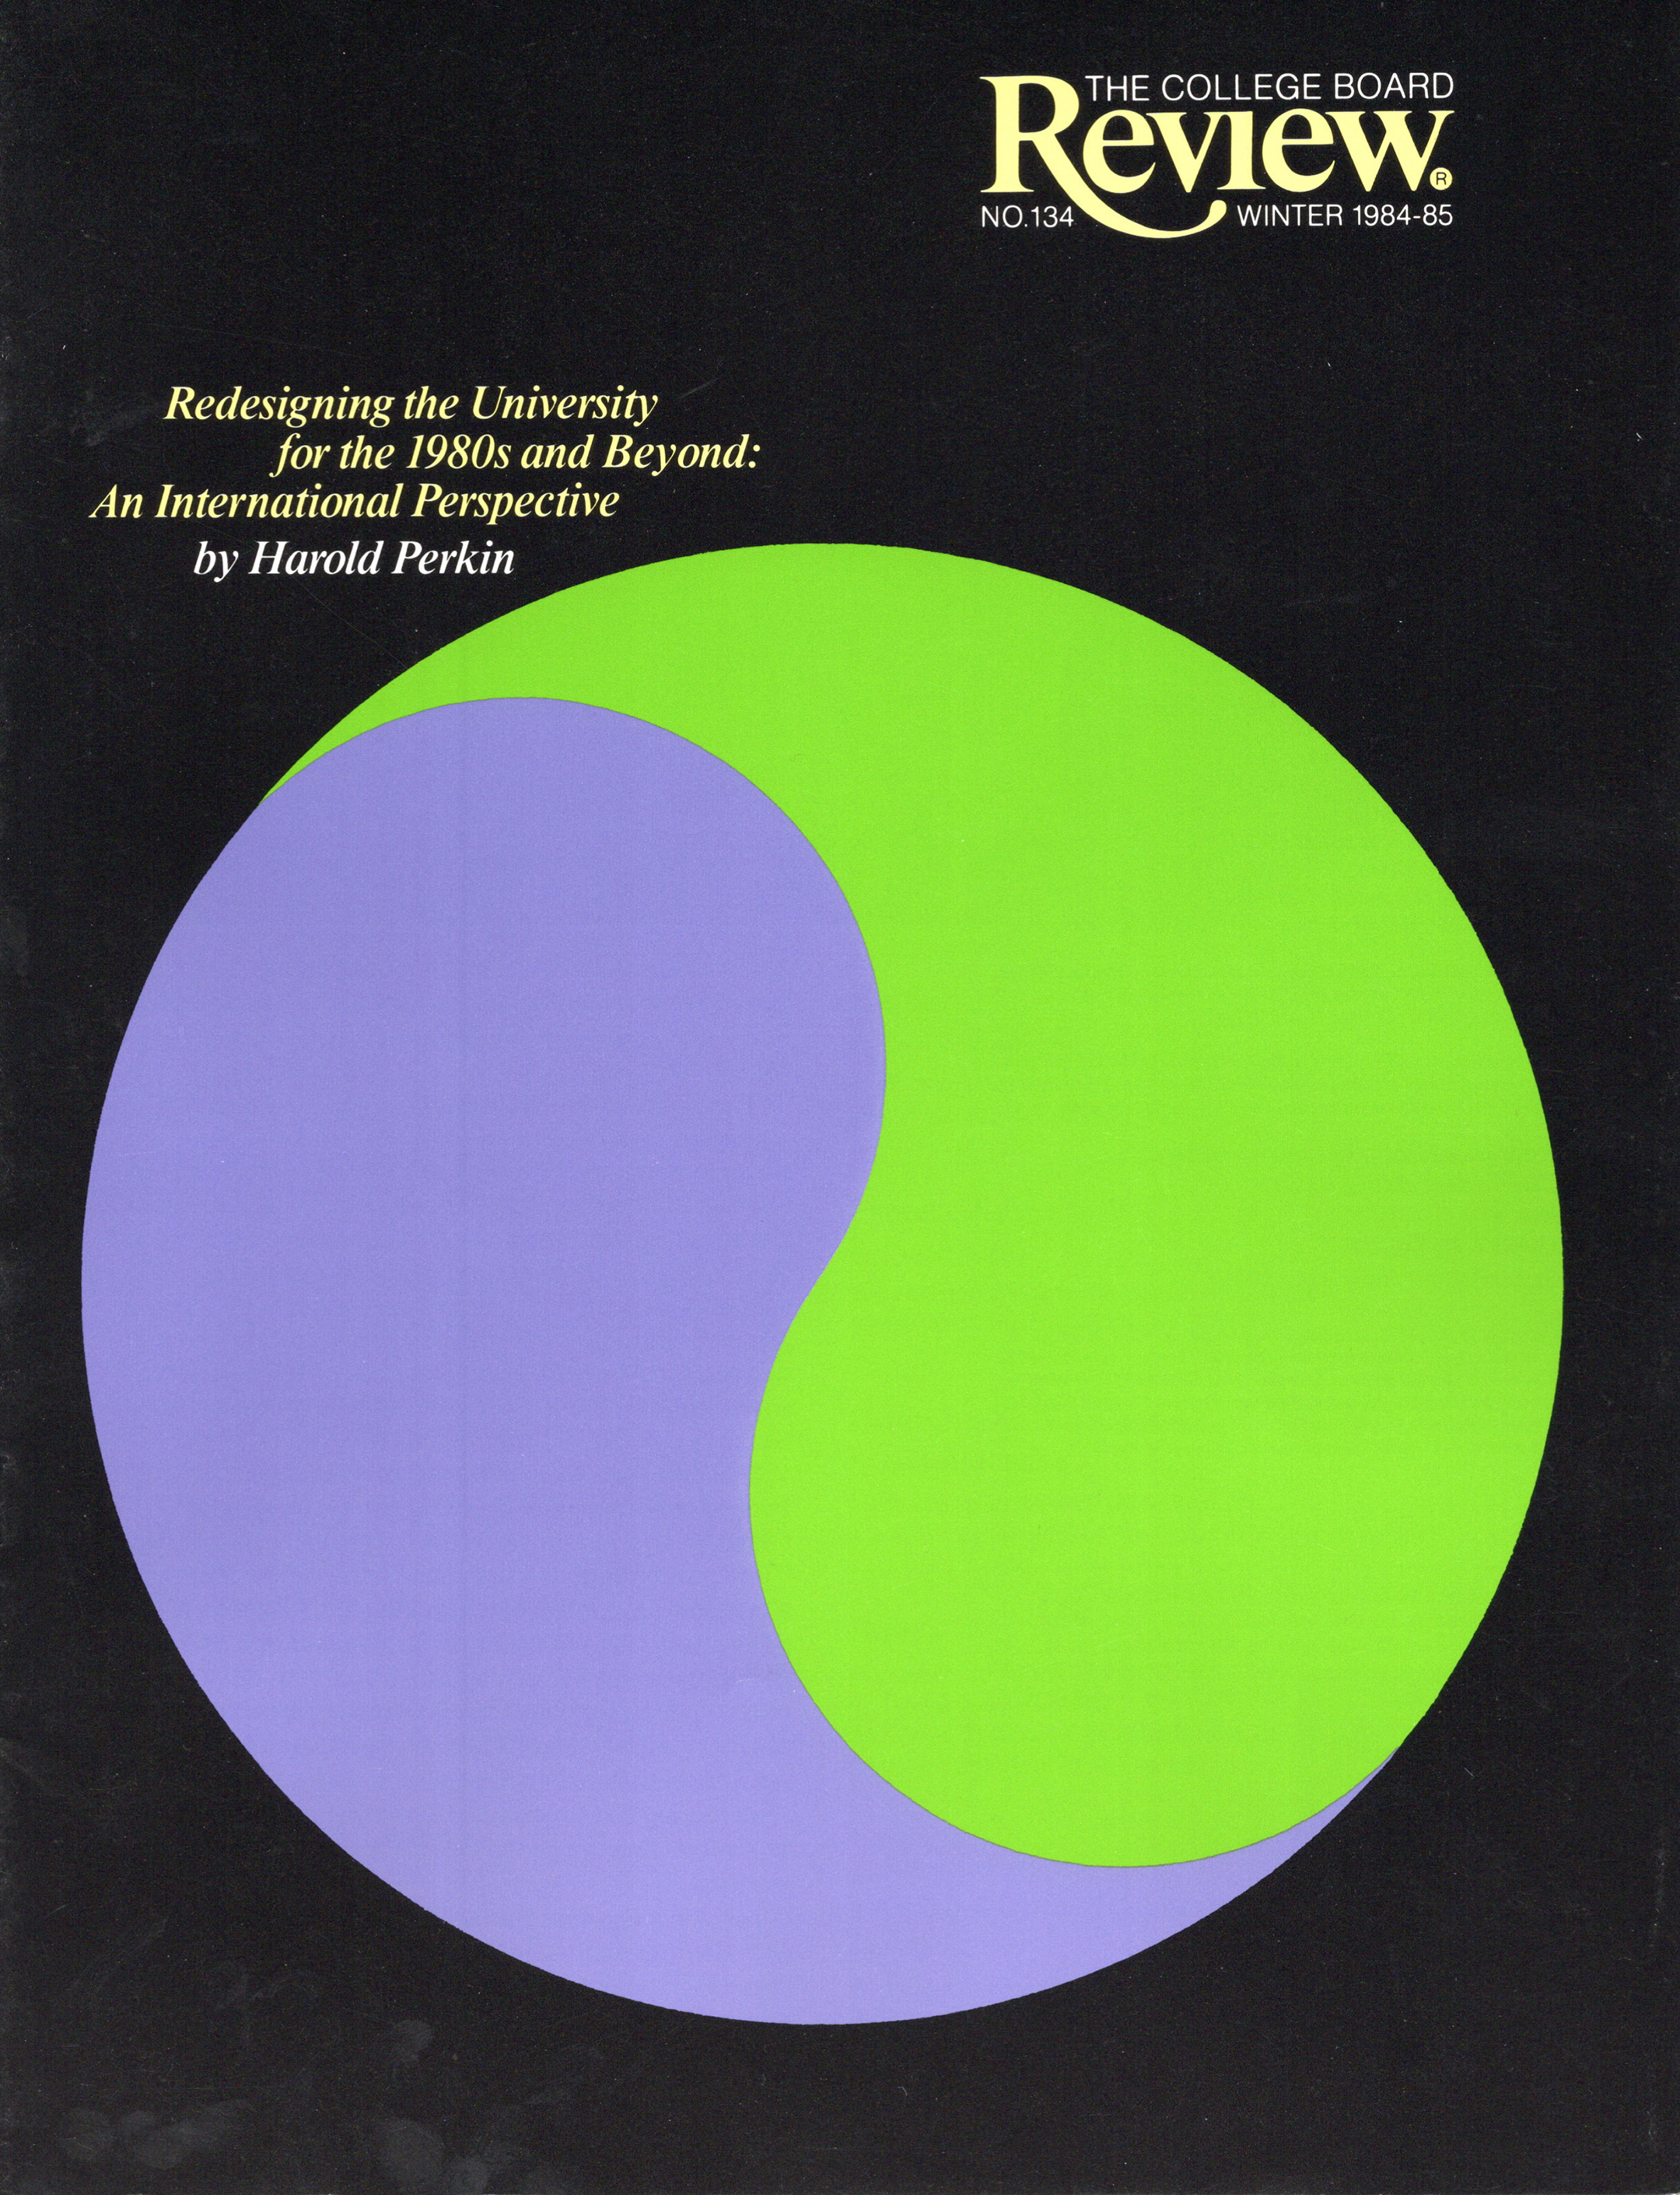 cover of the winter 1984-85 issue of the college board review showing a yin-yang symbol in purple and green on a black background with the text "redefining the university for the 1980s and beyond" in the top left corner